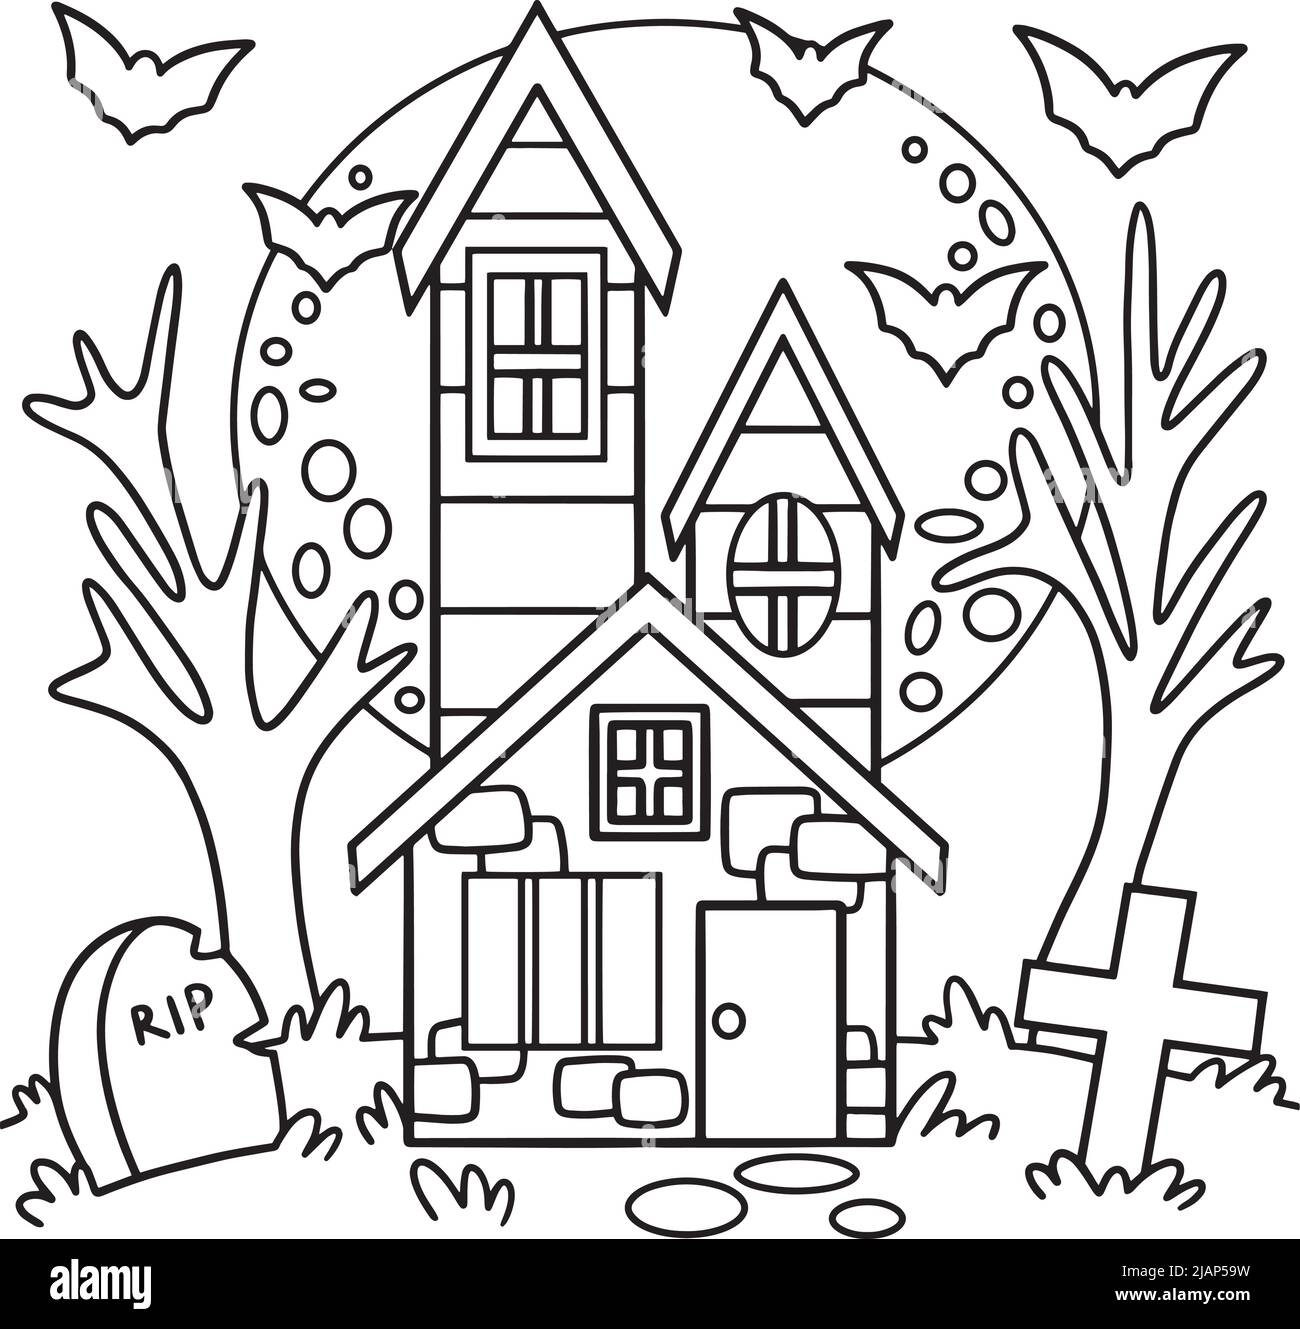 Haunted house halloween coloring page for kids stock vector image art